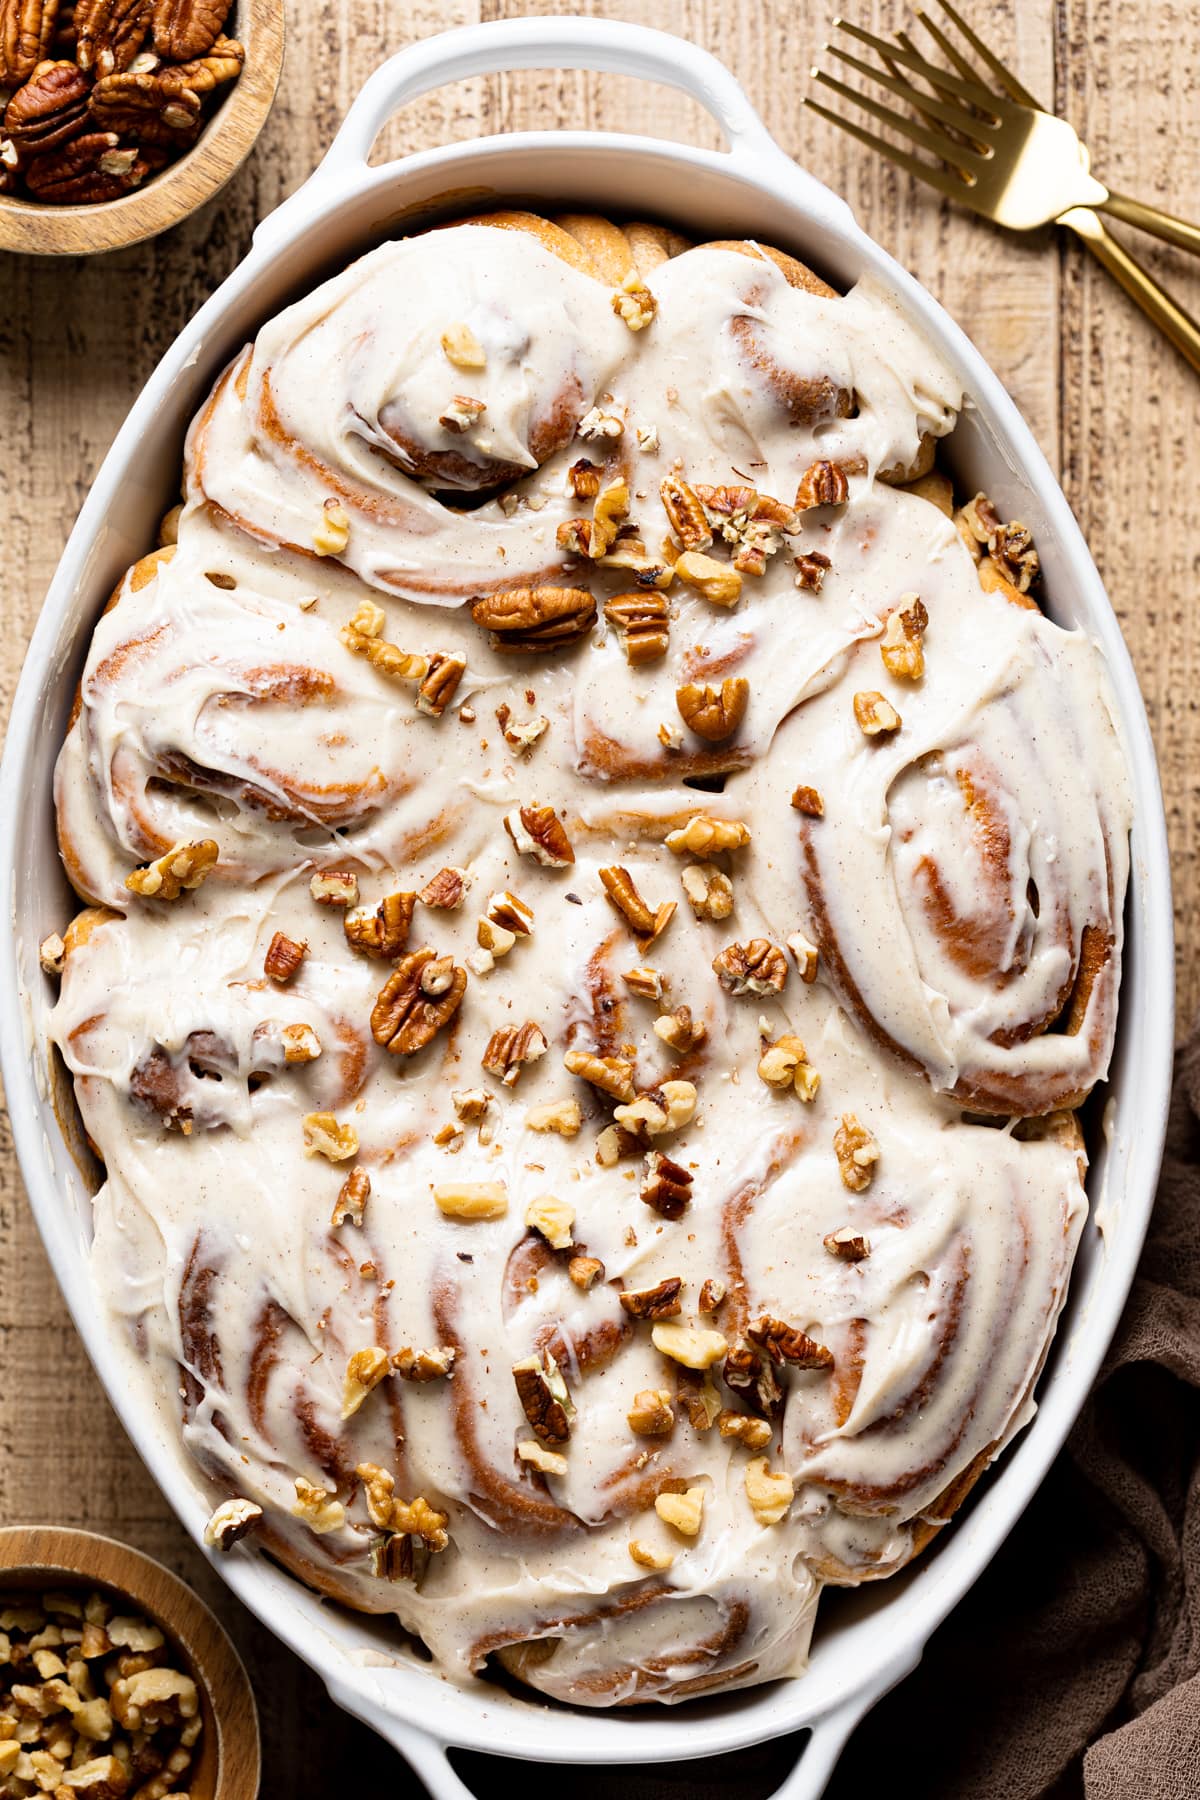 Banana Bread Cinnamon Rolls with Maple Cream Cheese Frosting topped with nuts